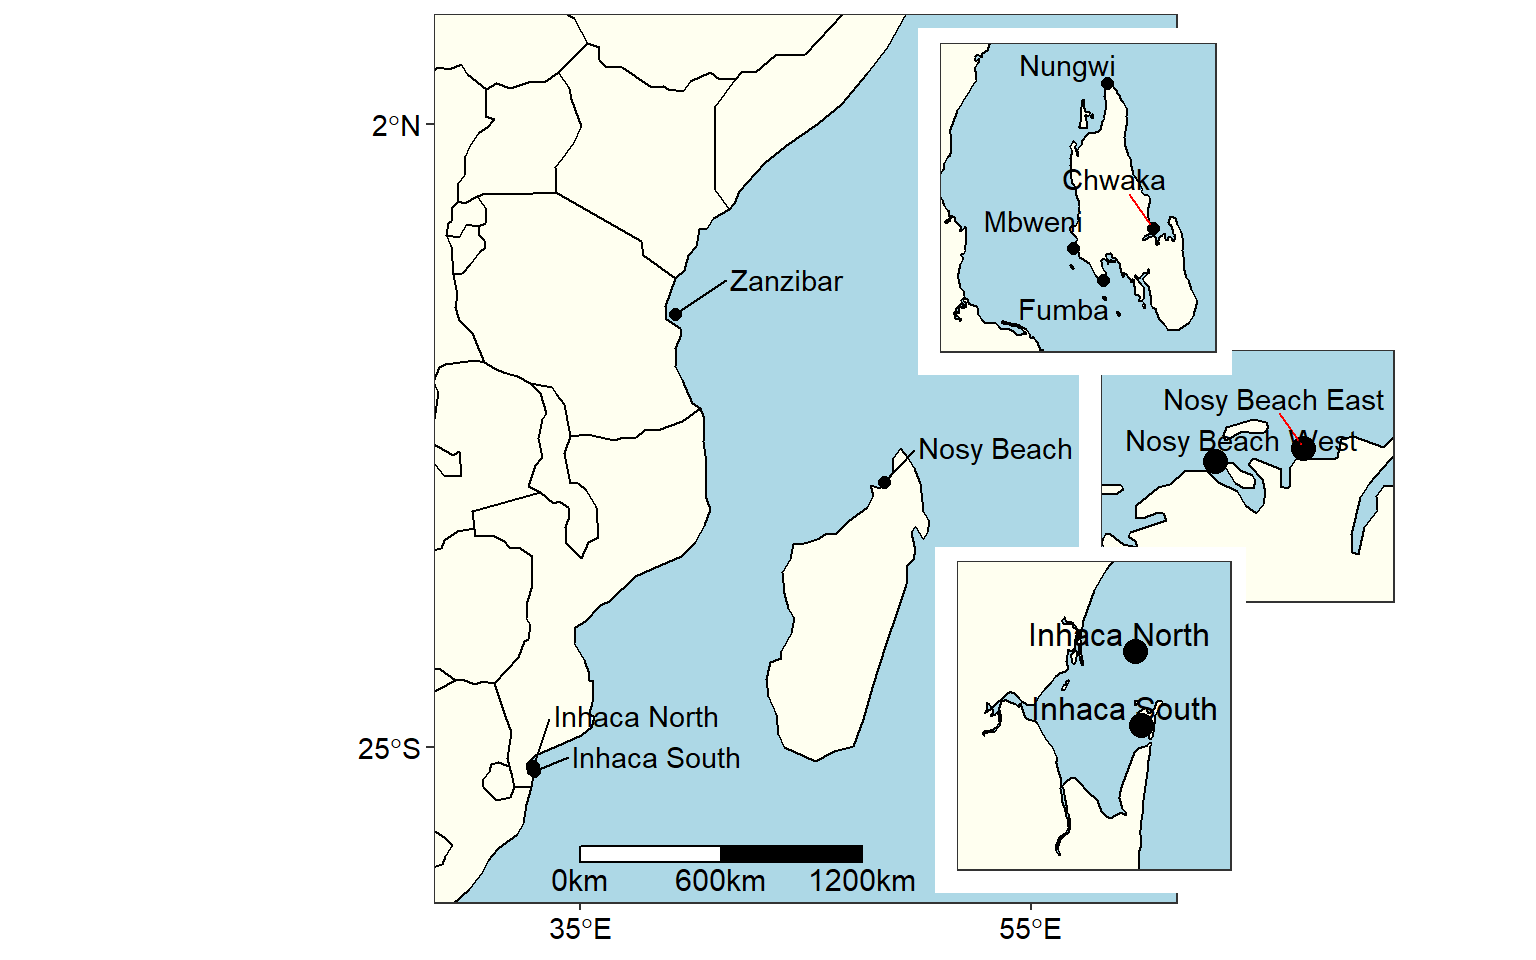 Map of area of interest drawn on on the WIO region area to show sampling stations